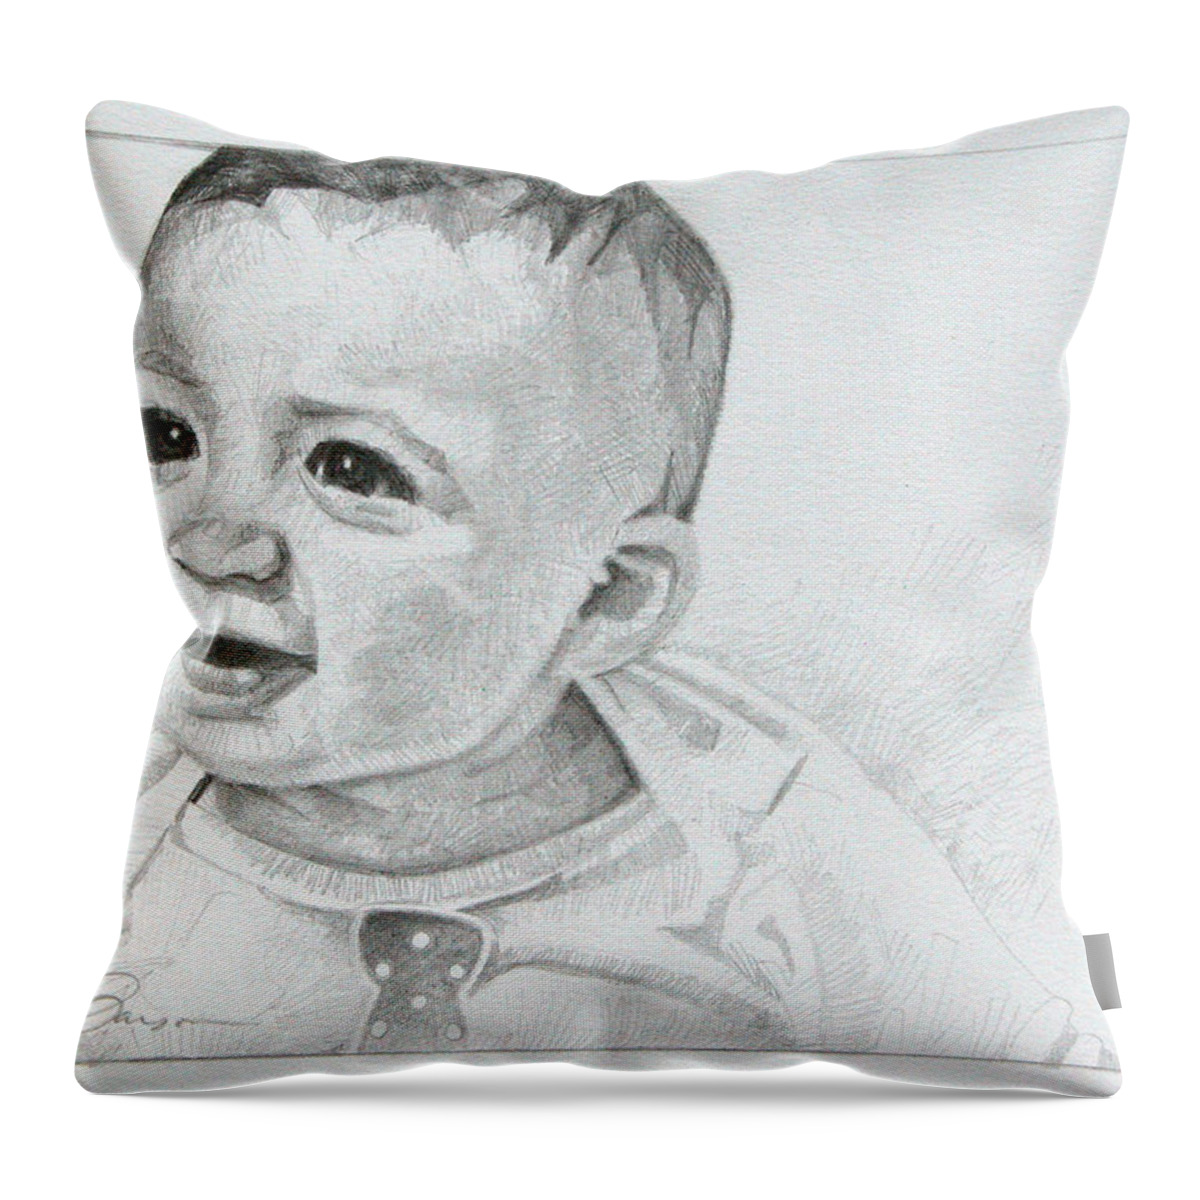 Portrait Throw Pillow featuring the drawing Portrait of Ben pencil drawing by T S Carson